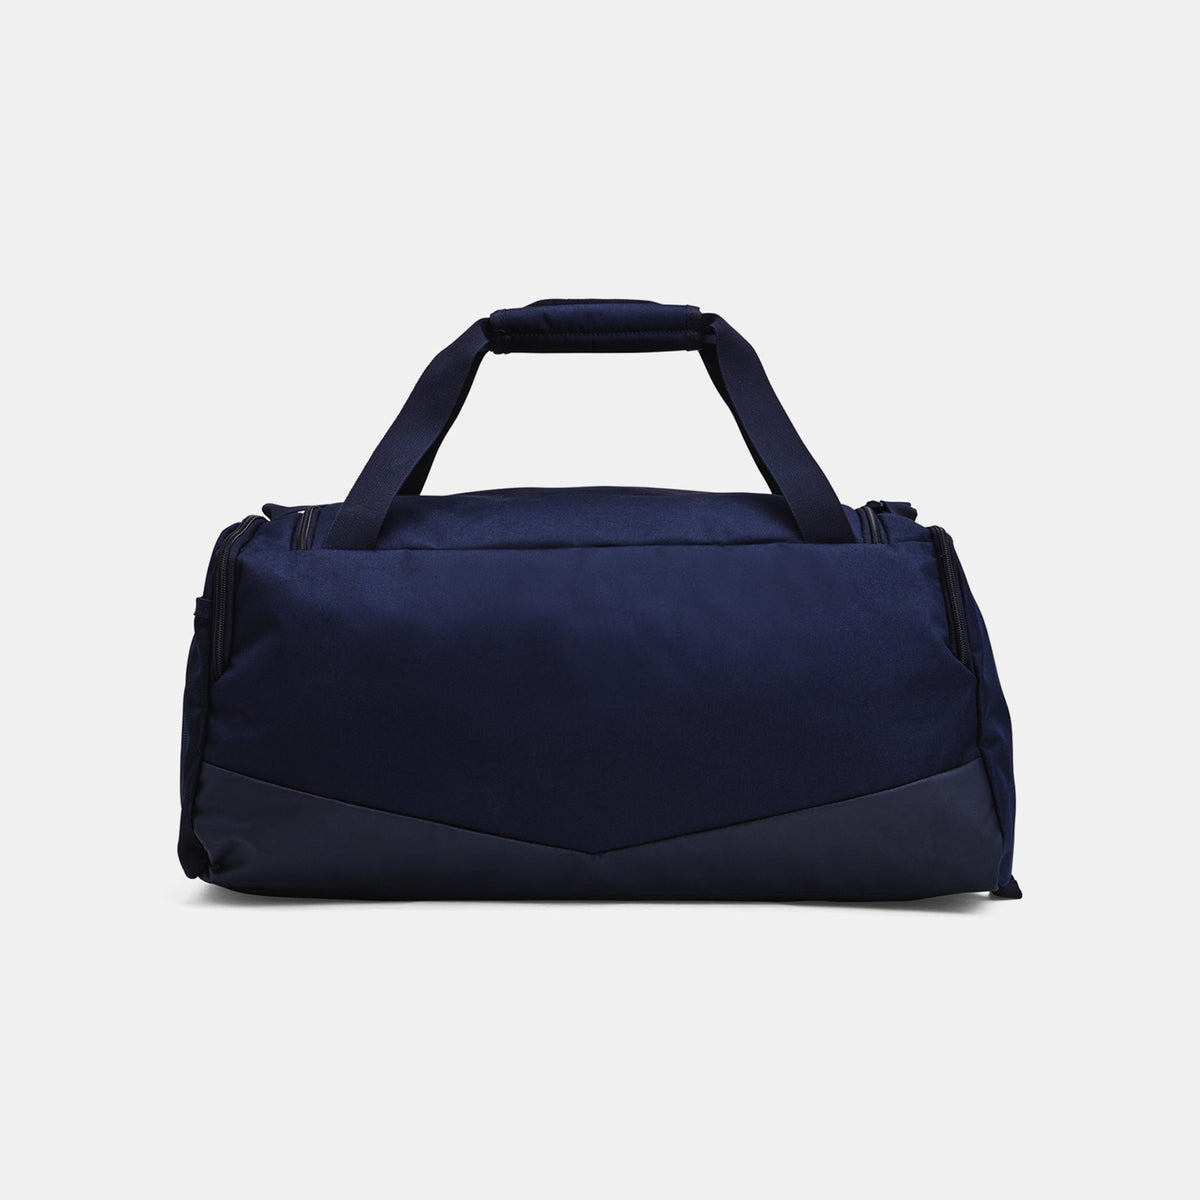 Under Armour Undeniable 5.0 Small Duffel Bag: Navy